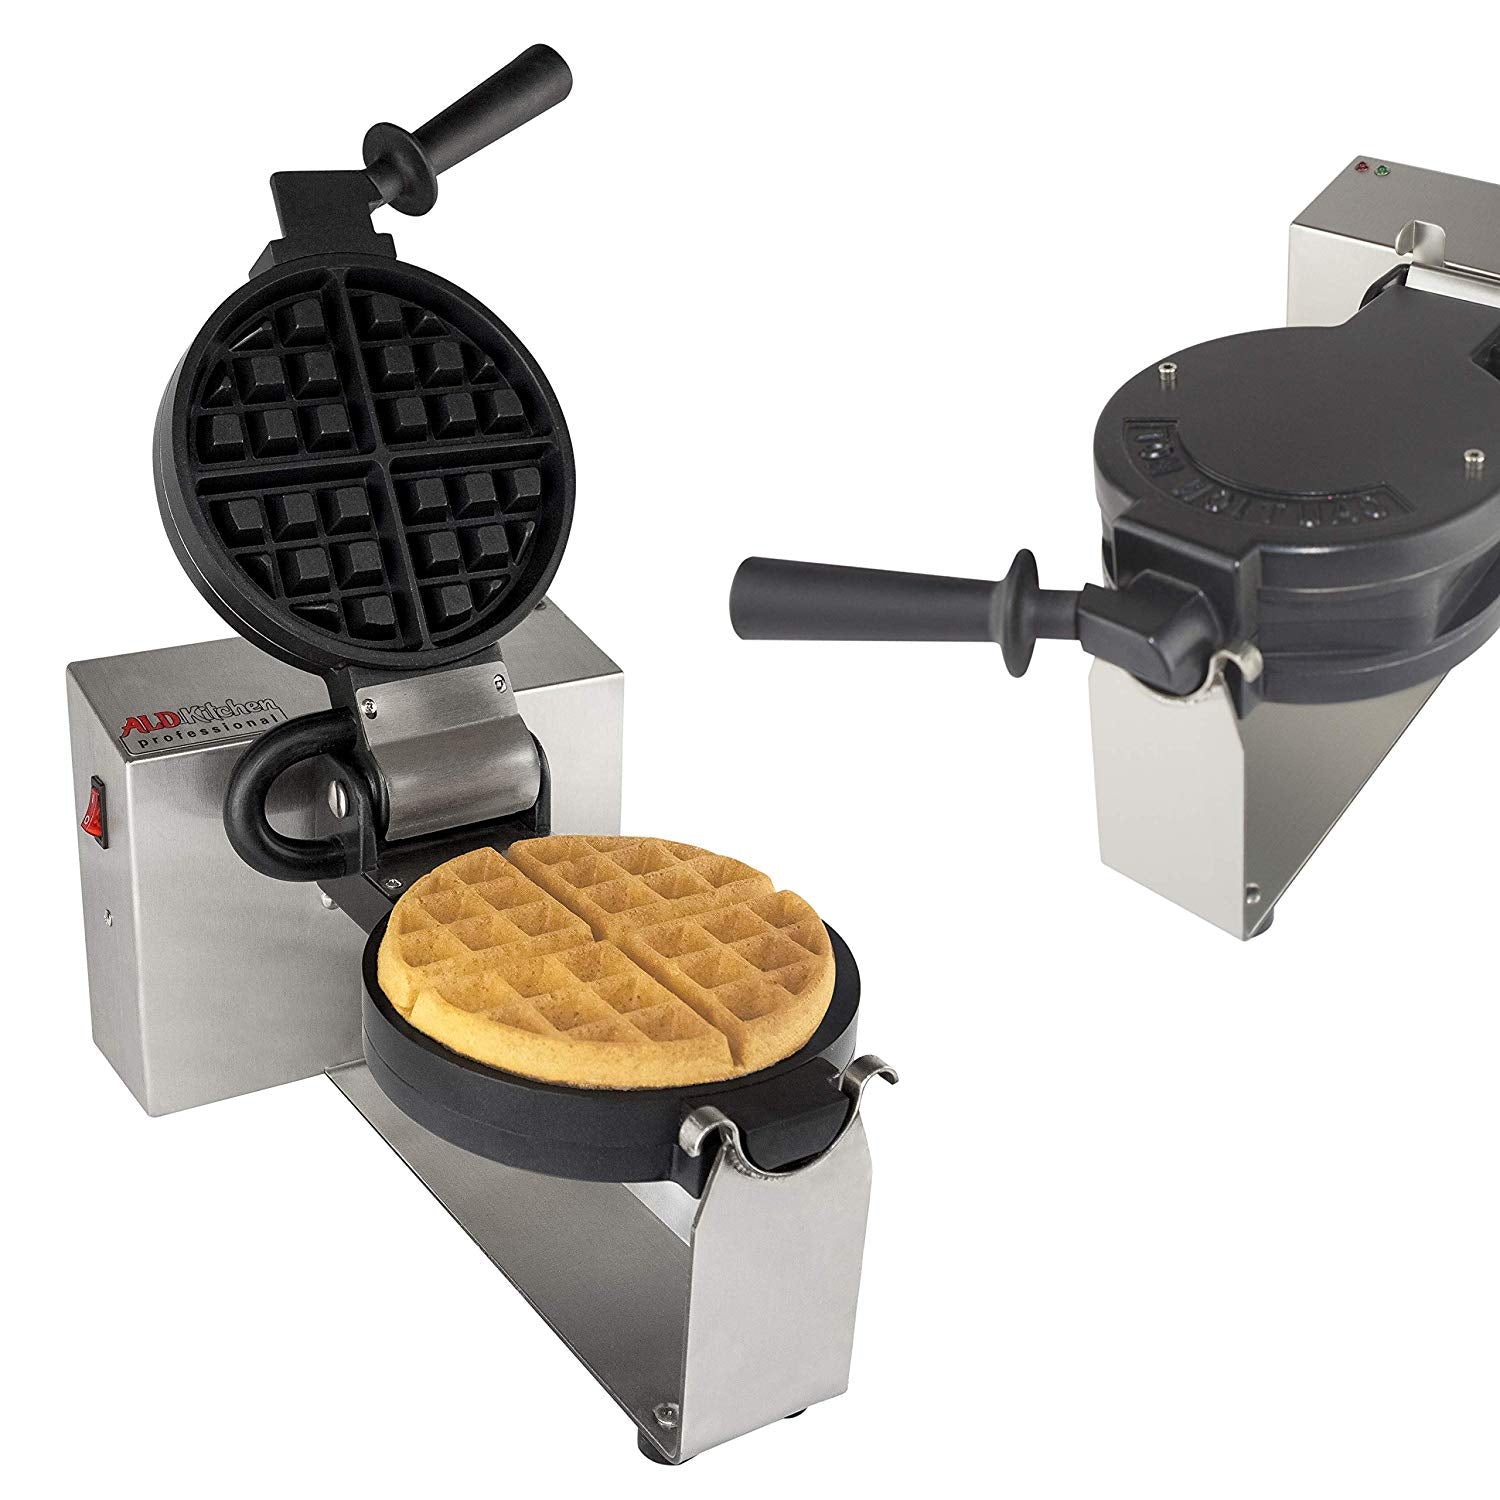 Waffle Maker Professional for BELGIAN Waffle, QQ, Muffin, Cake and Bel